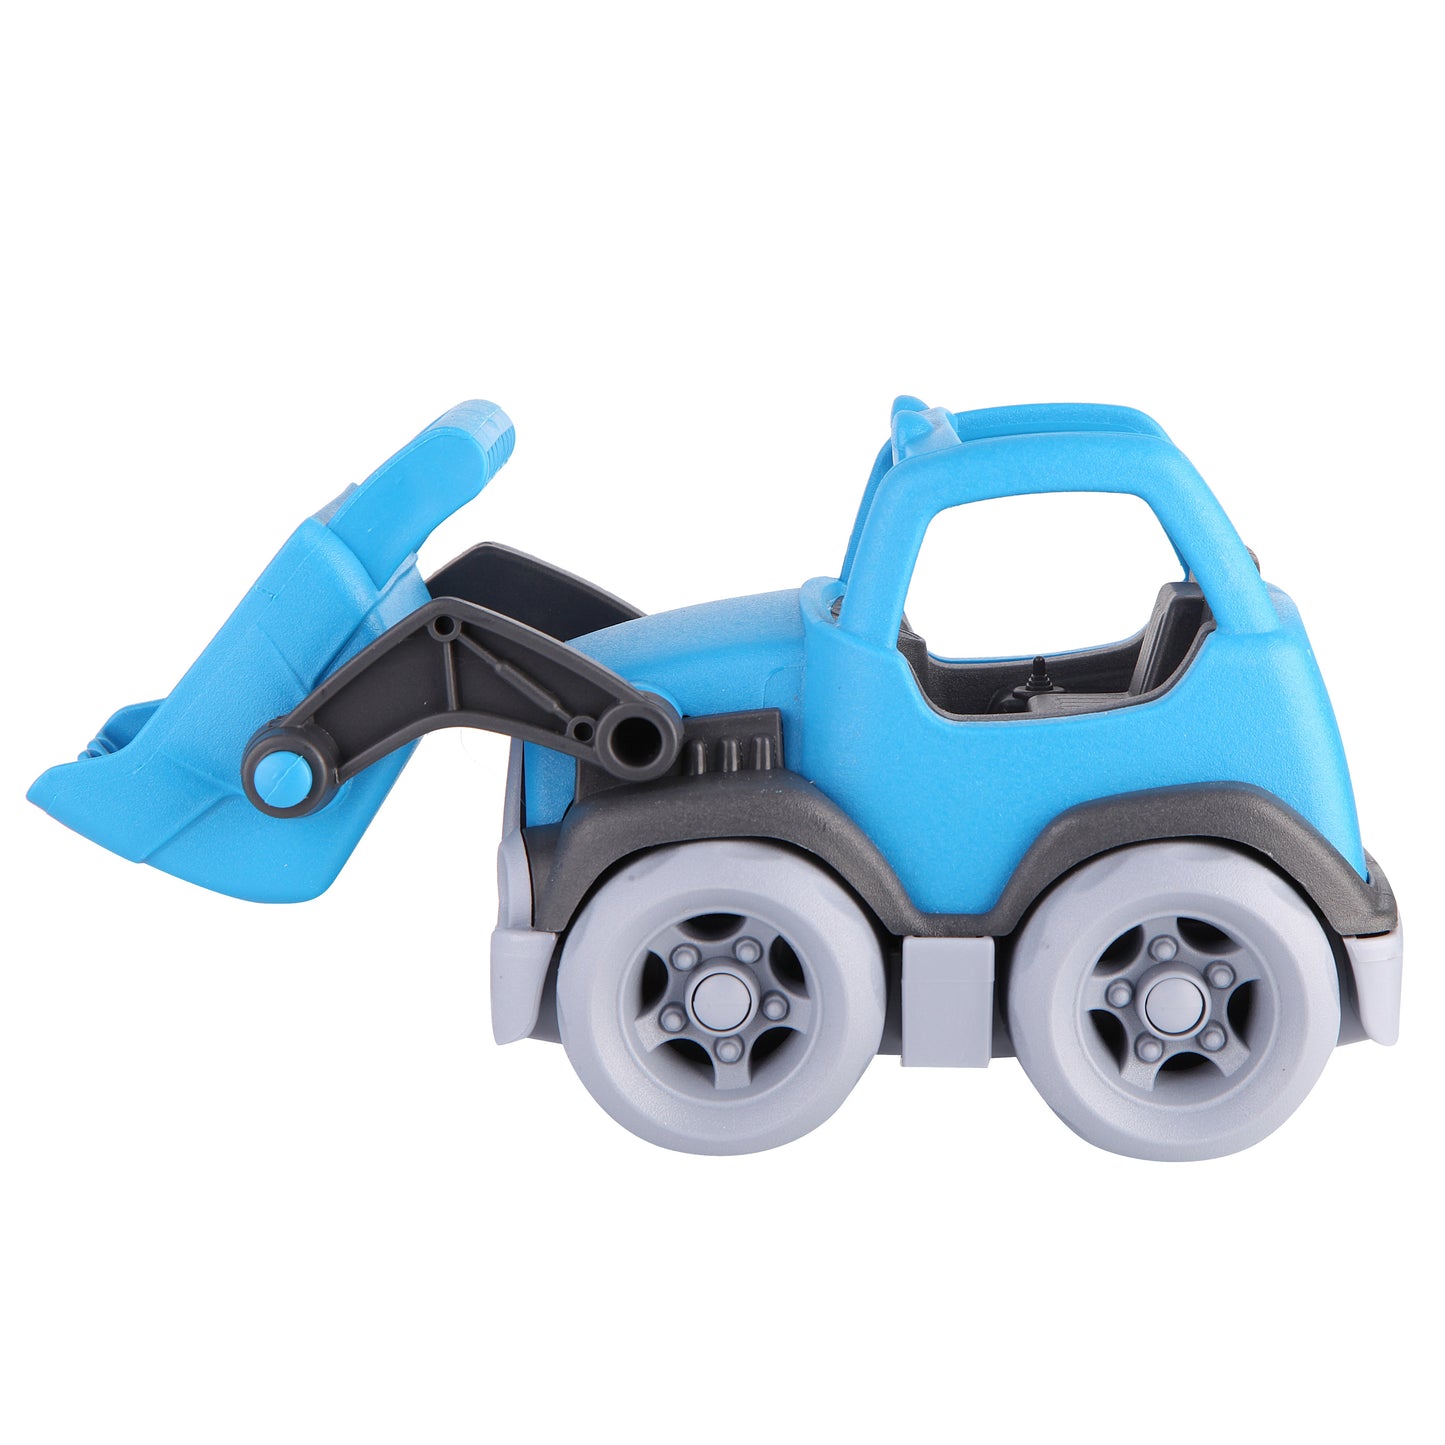 Blue Mini Loader-Blue, Car, catveh, Communication, Coordination, Imagination, Language, Loader, Motor, Pretend, Skills, Toy, Tractor, Truck, Wheels-Let's Be Child-[Too Twee]-[Tootwee]-[baby]-[newborn]-[clothes]-[essentials]-[toys]-[Lebanon]